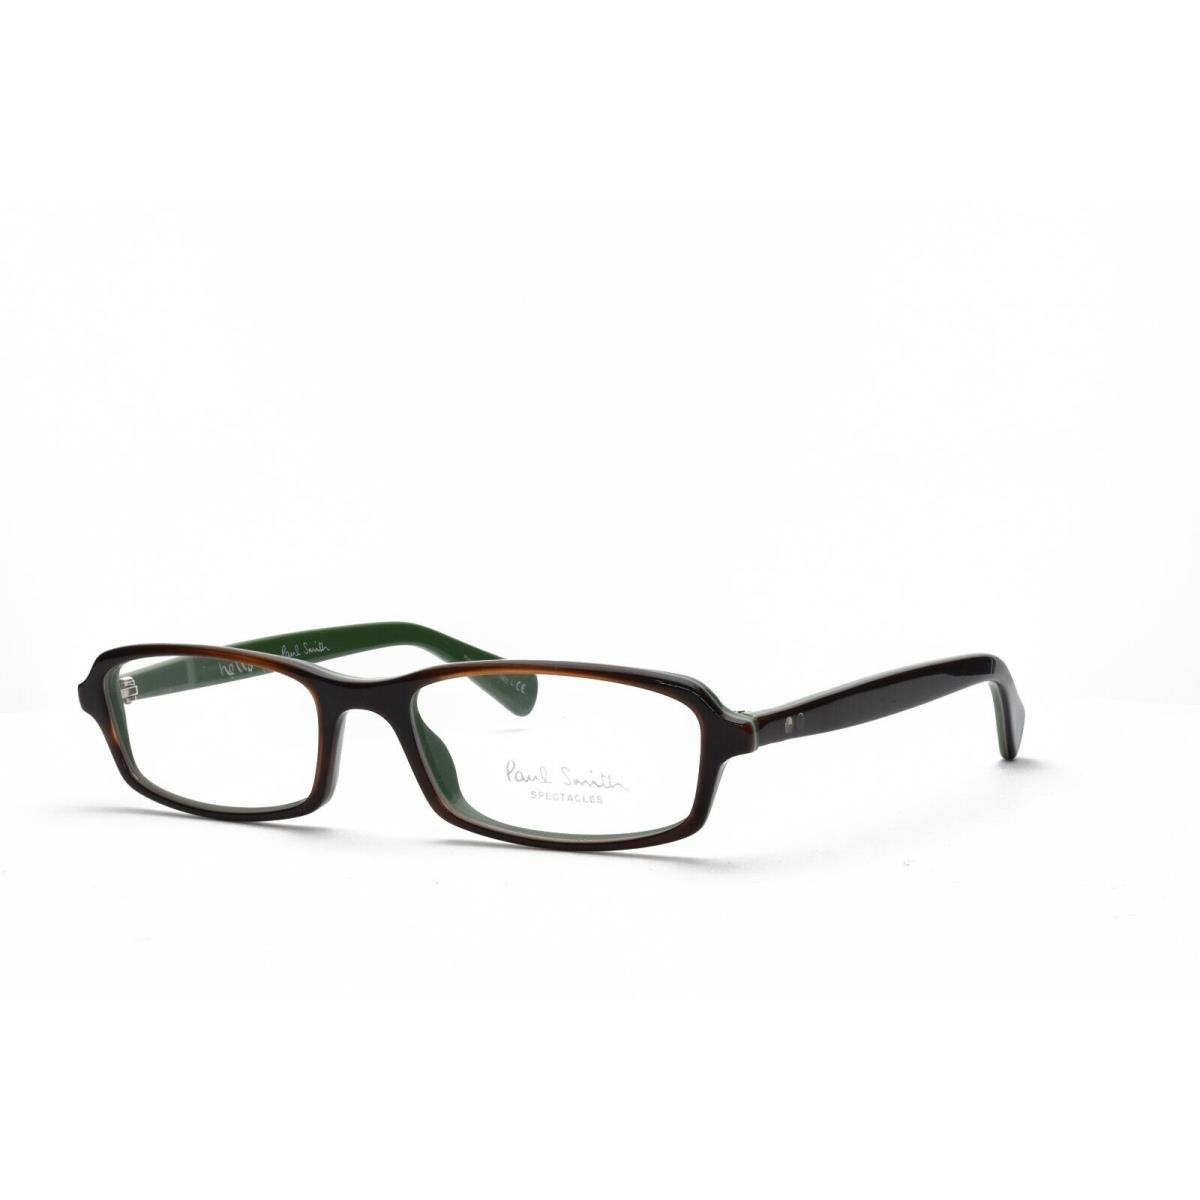 Paul Smith PS Doddie 8128 1107 Eyeglasses Frames Only 49-16-135